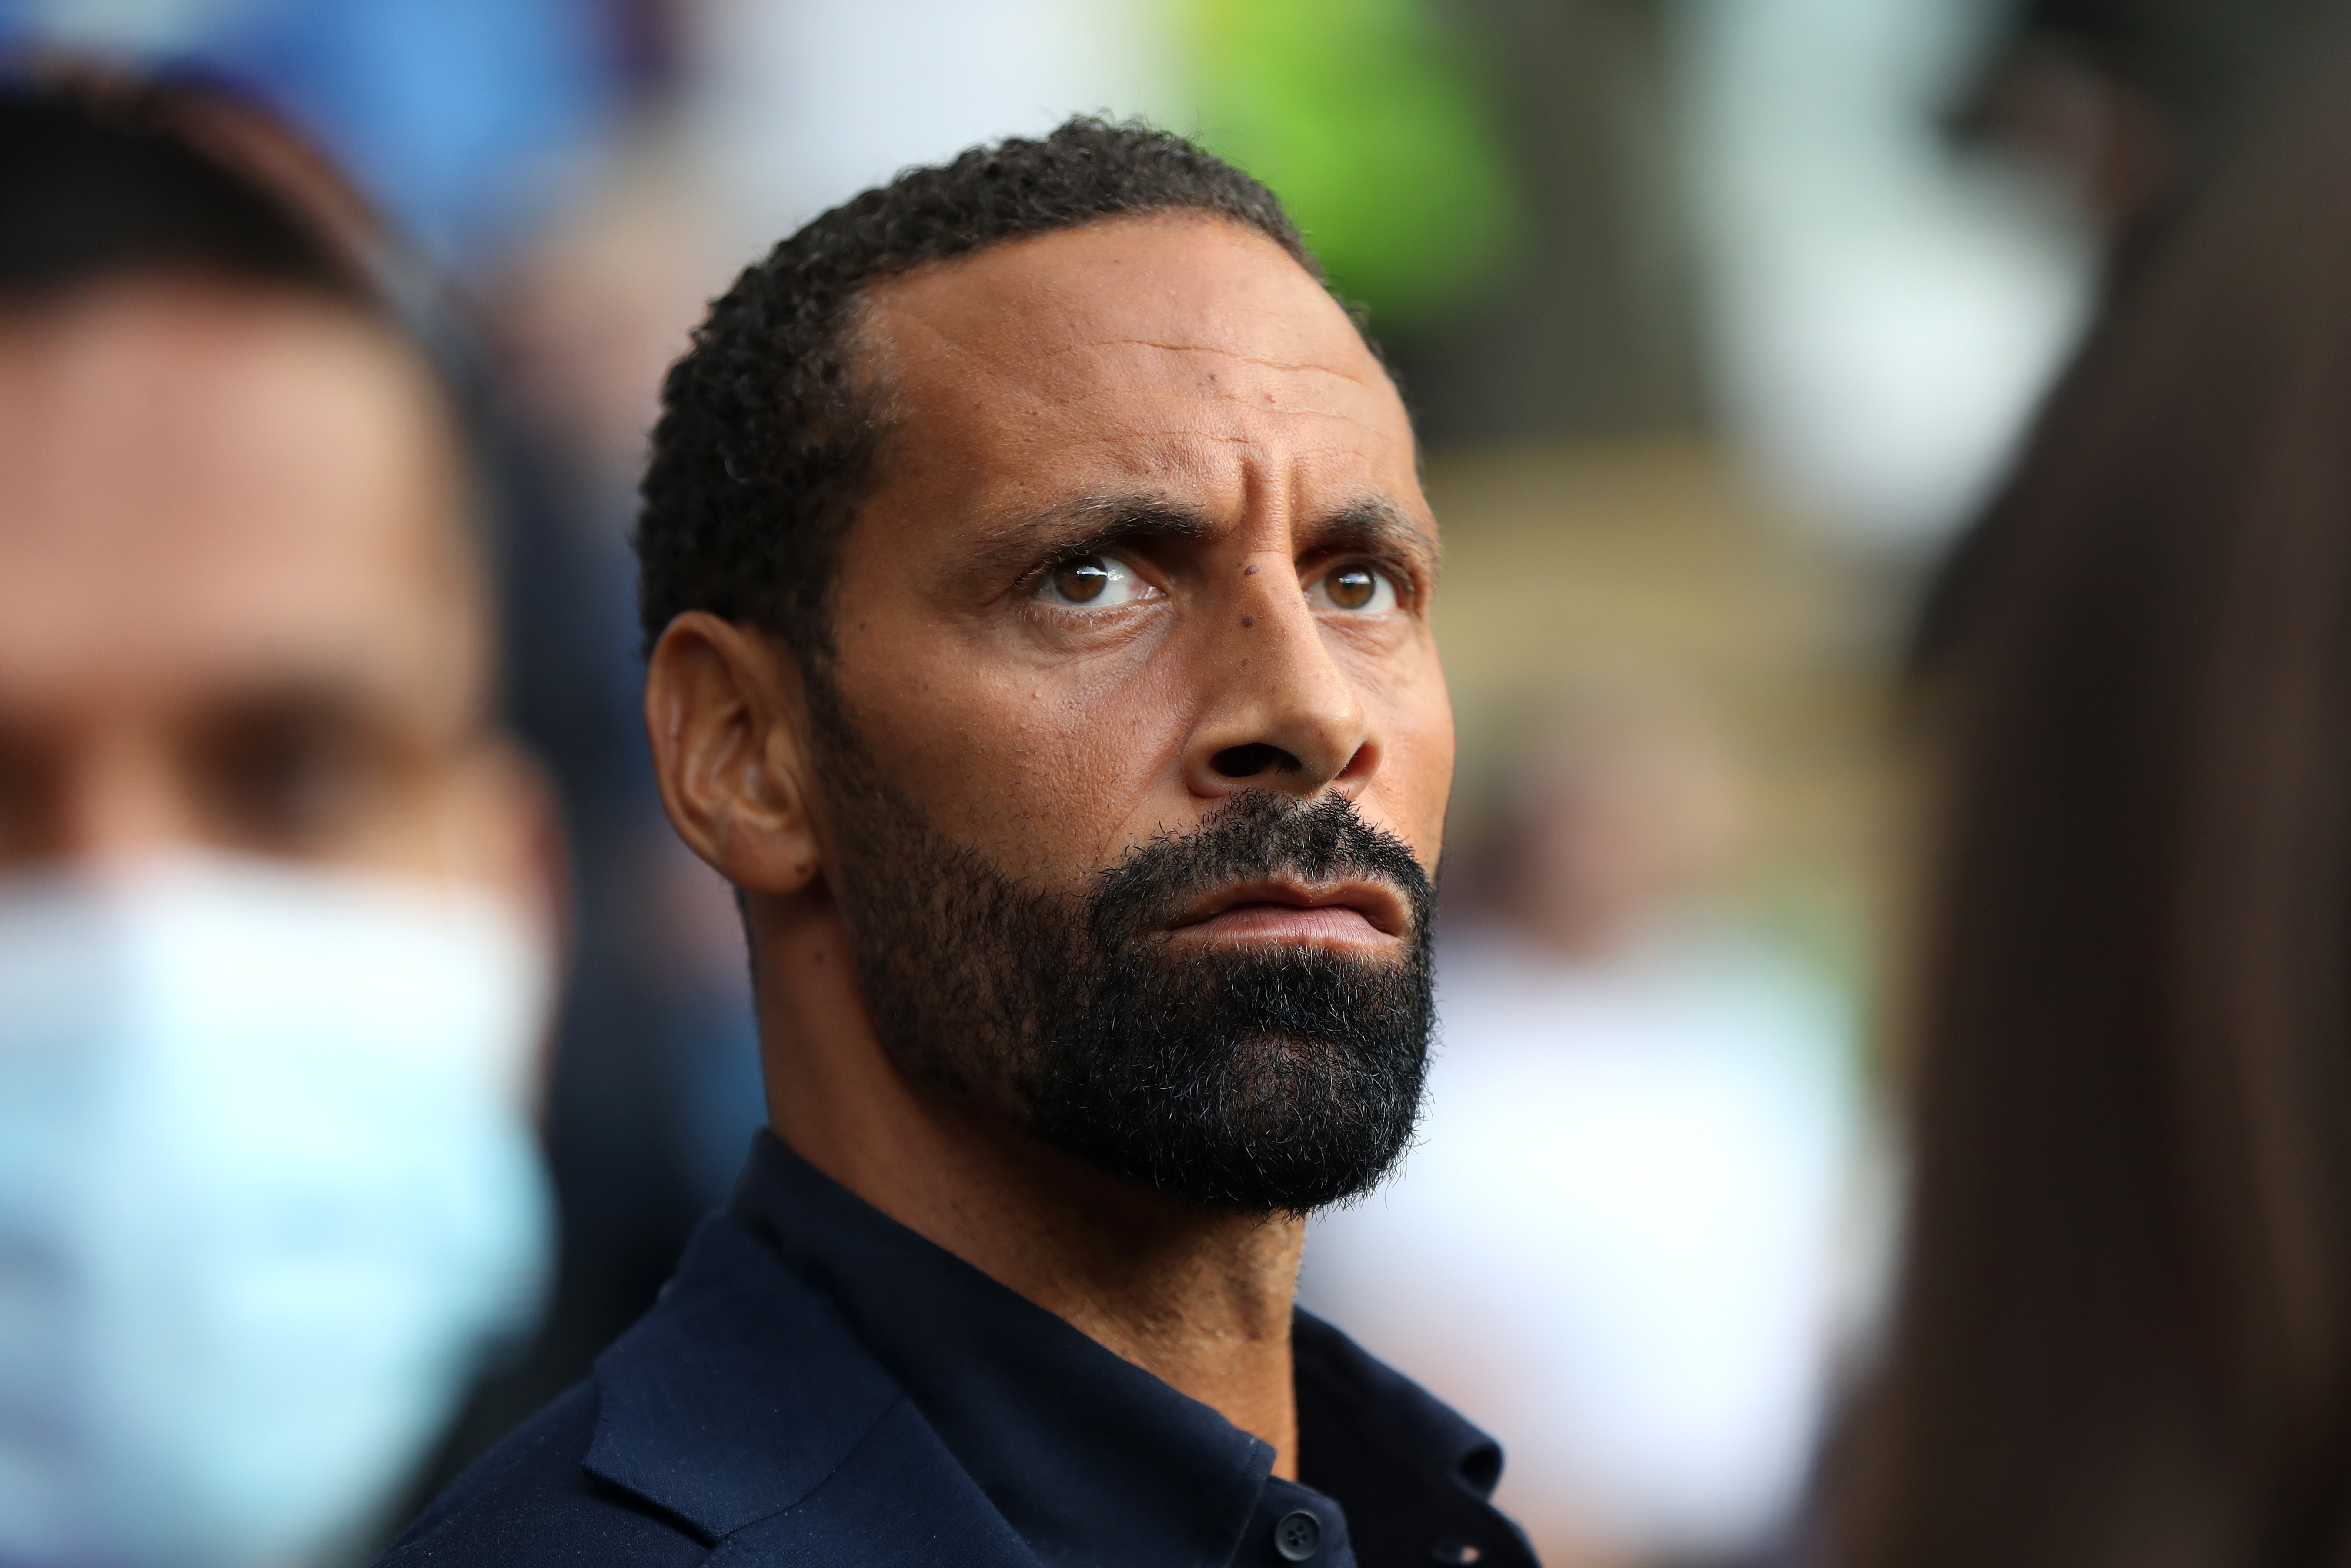 Former England defender Rio Ferdinand was racially abused after the Euro 2020 final (Niall Carson/PA)